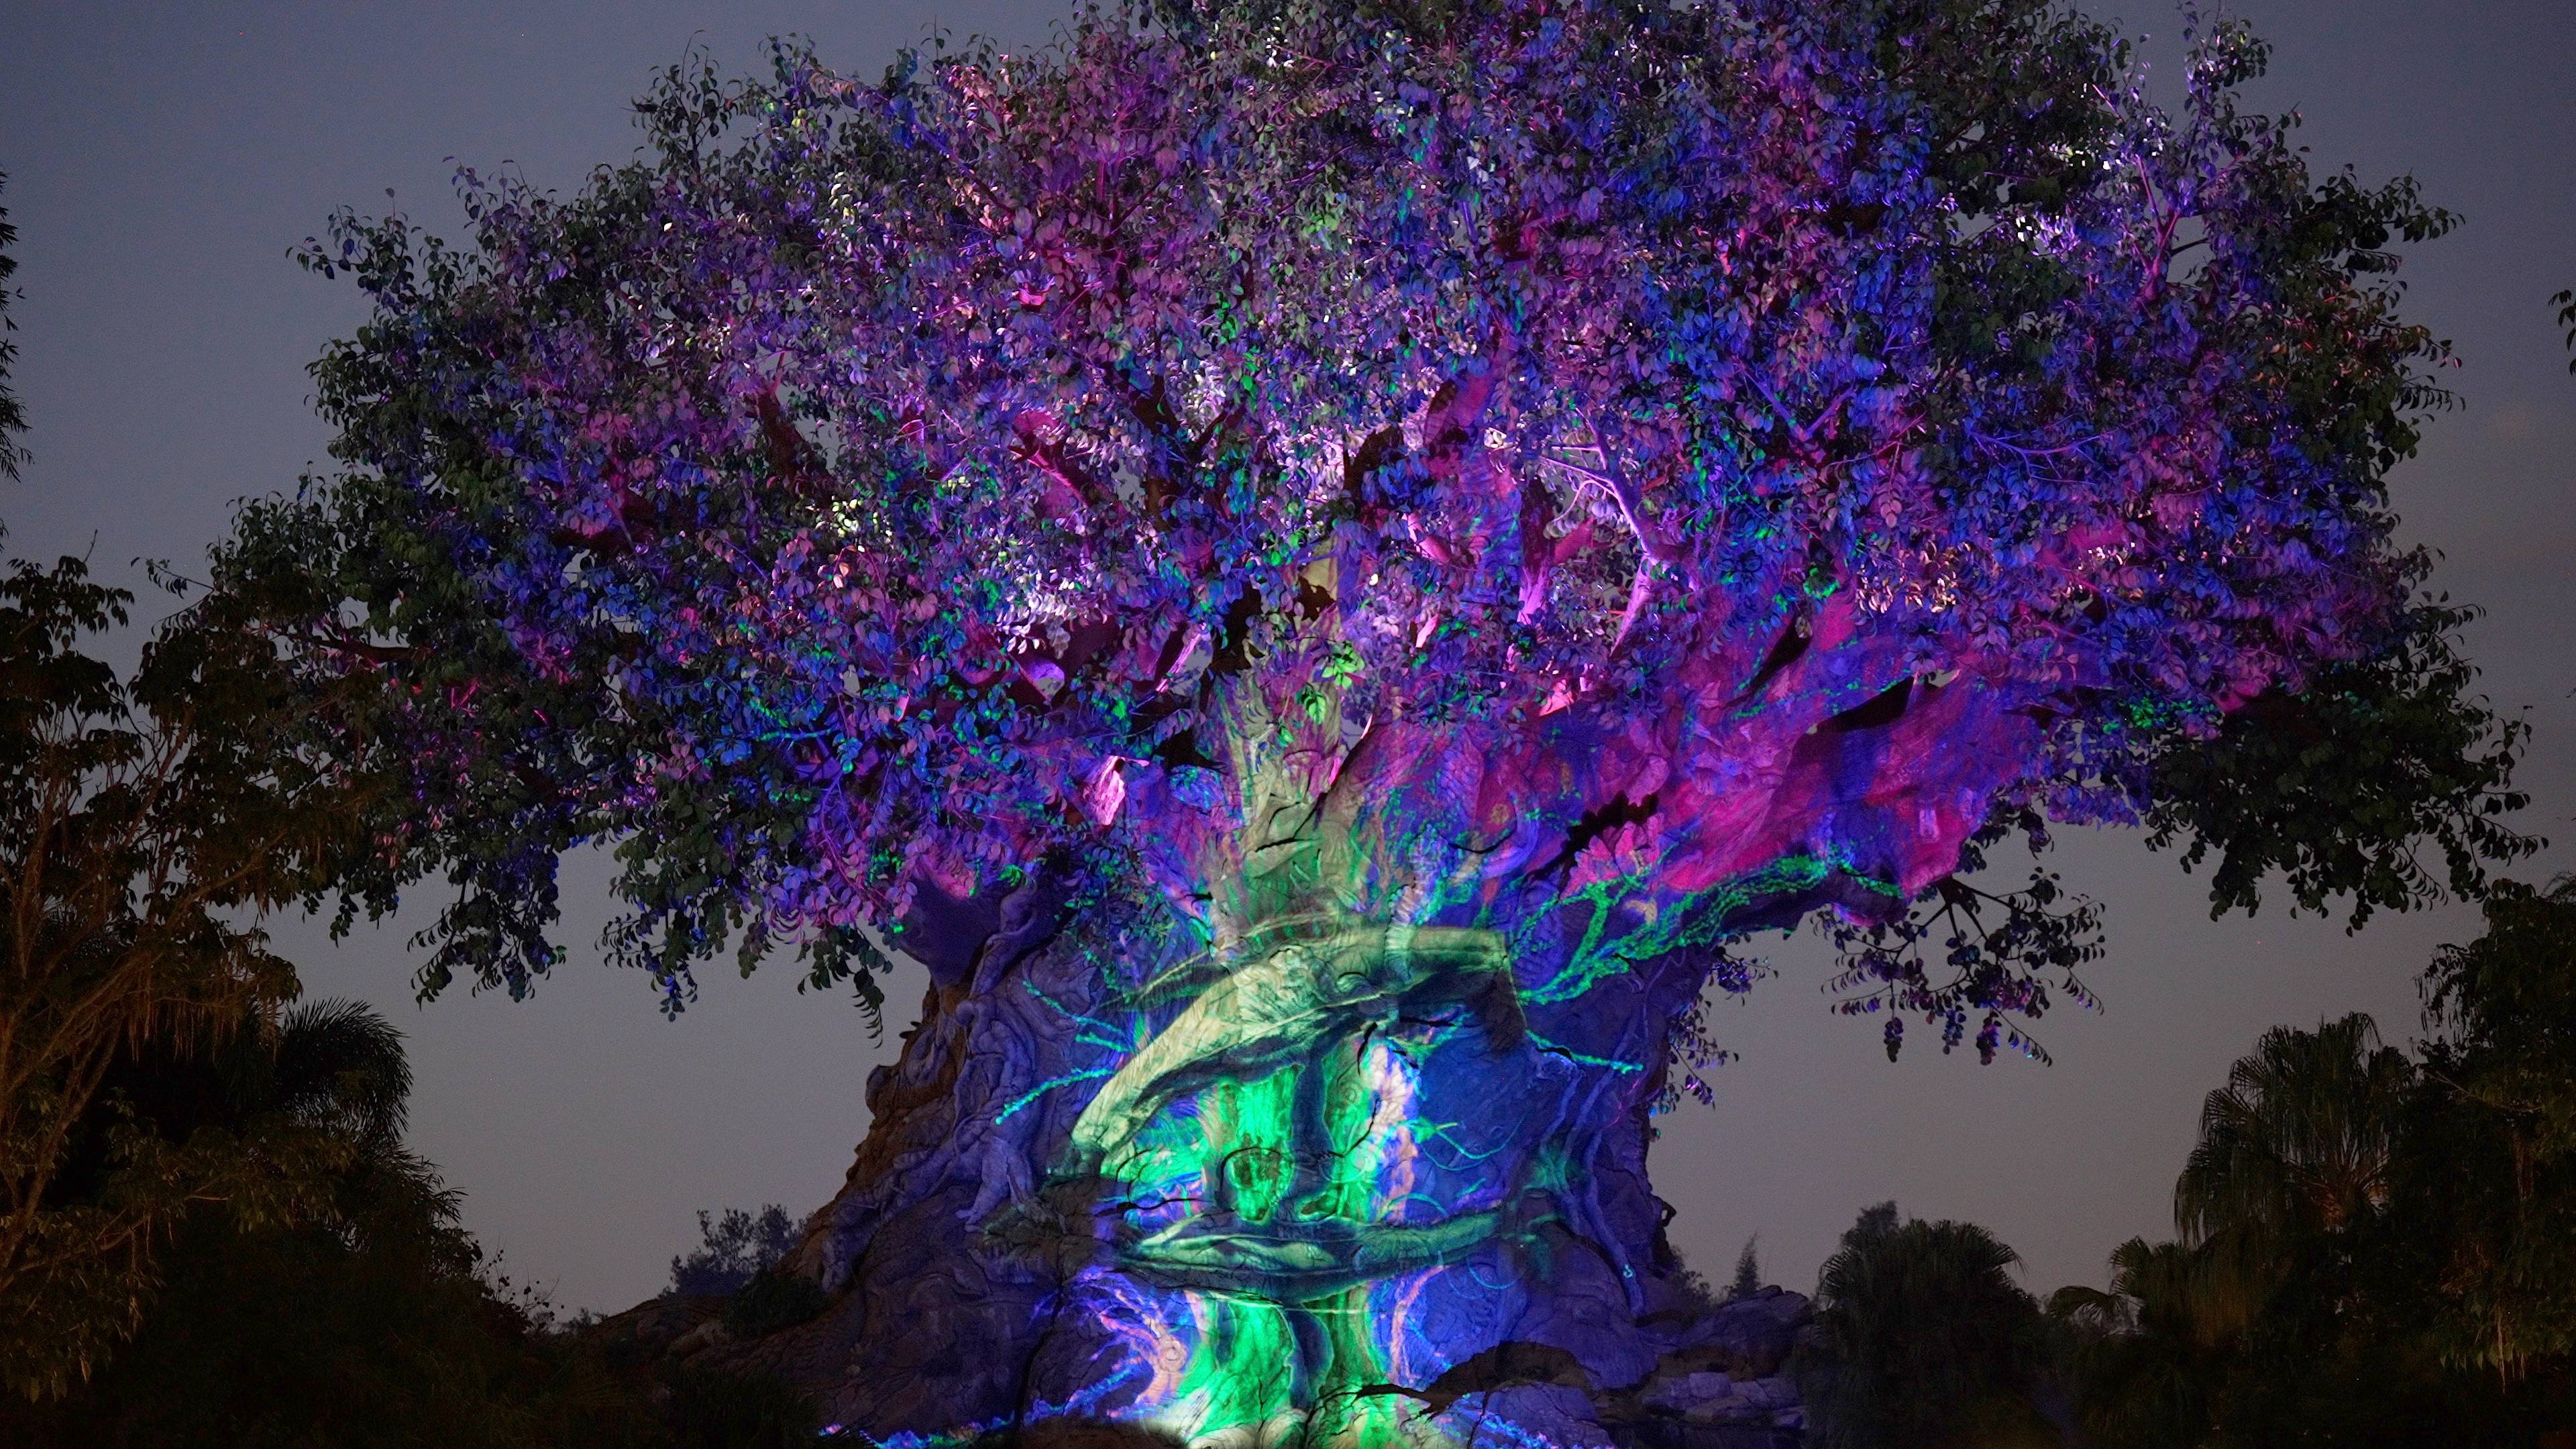 'Avatar: The Way of Water' projection show is now playing on the Tree of Life at Disney's Animal Kingdom